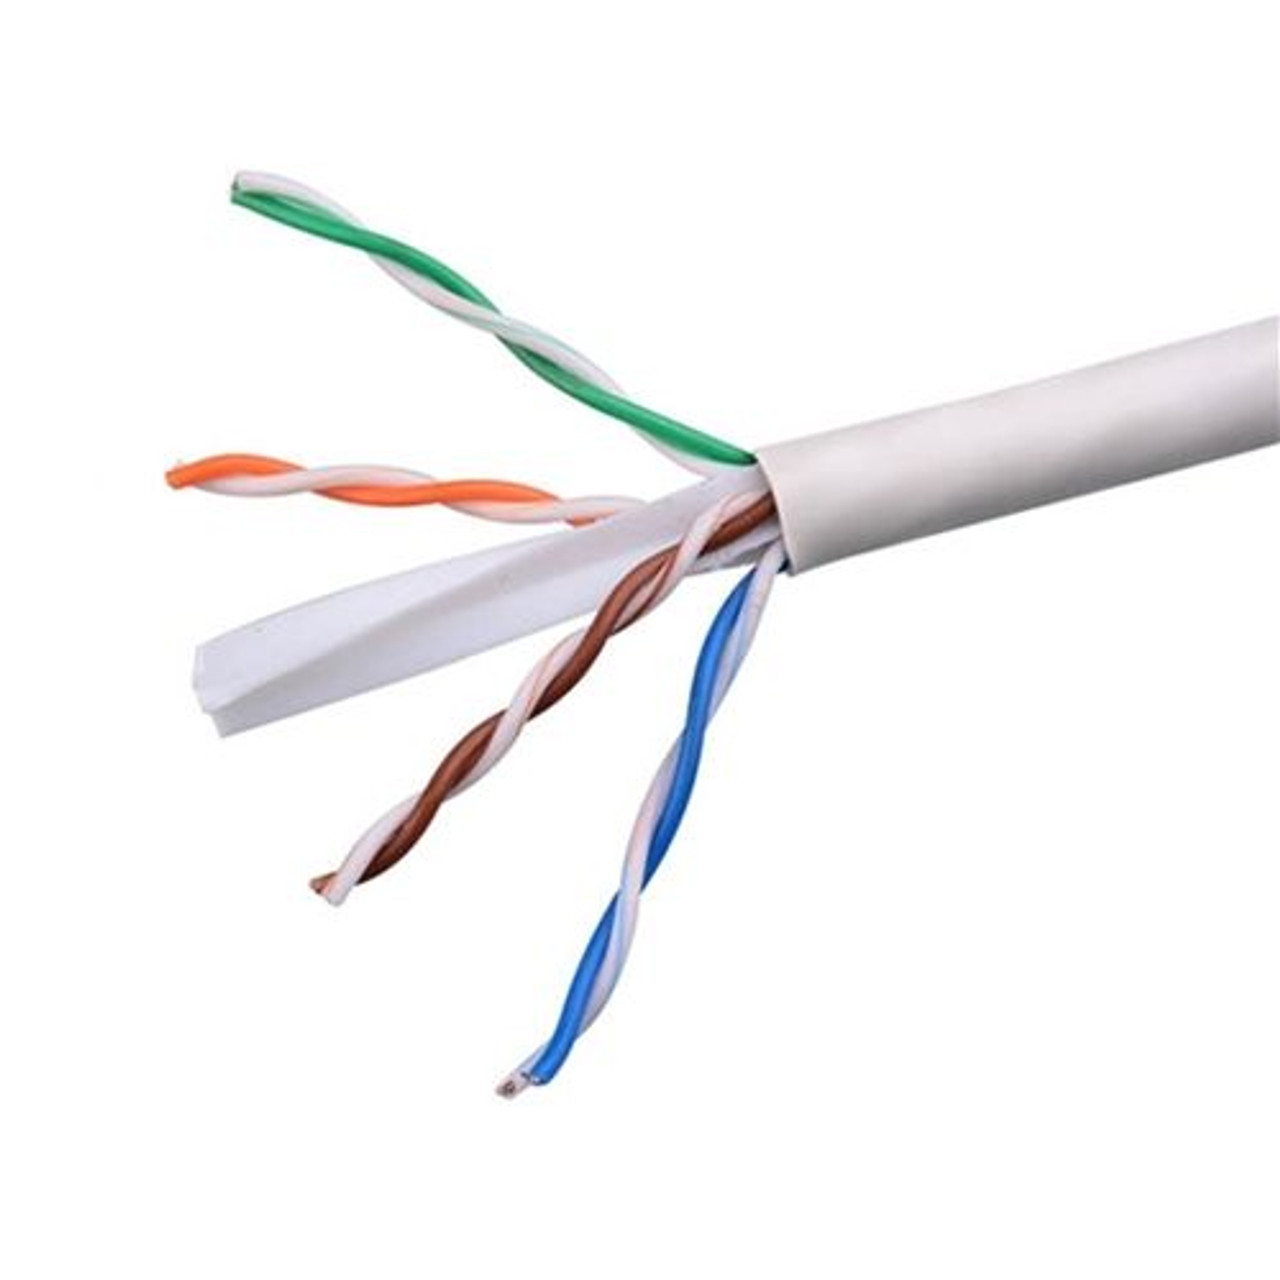 Eagle CAT6 500' FT Bulk Cable Roll 550 MHz 23 AWG Solid Copper Unshielded White Network FastCat UTP CMR Ethernet Certified 4 Twisted Pair UL Listed PVC Jacket Category 6 Enhanced CPU Data Transfer Line